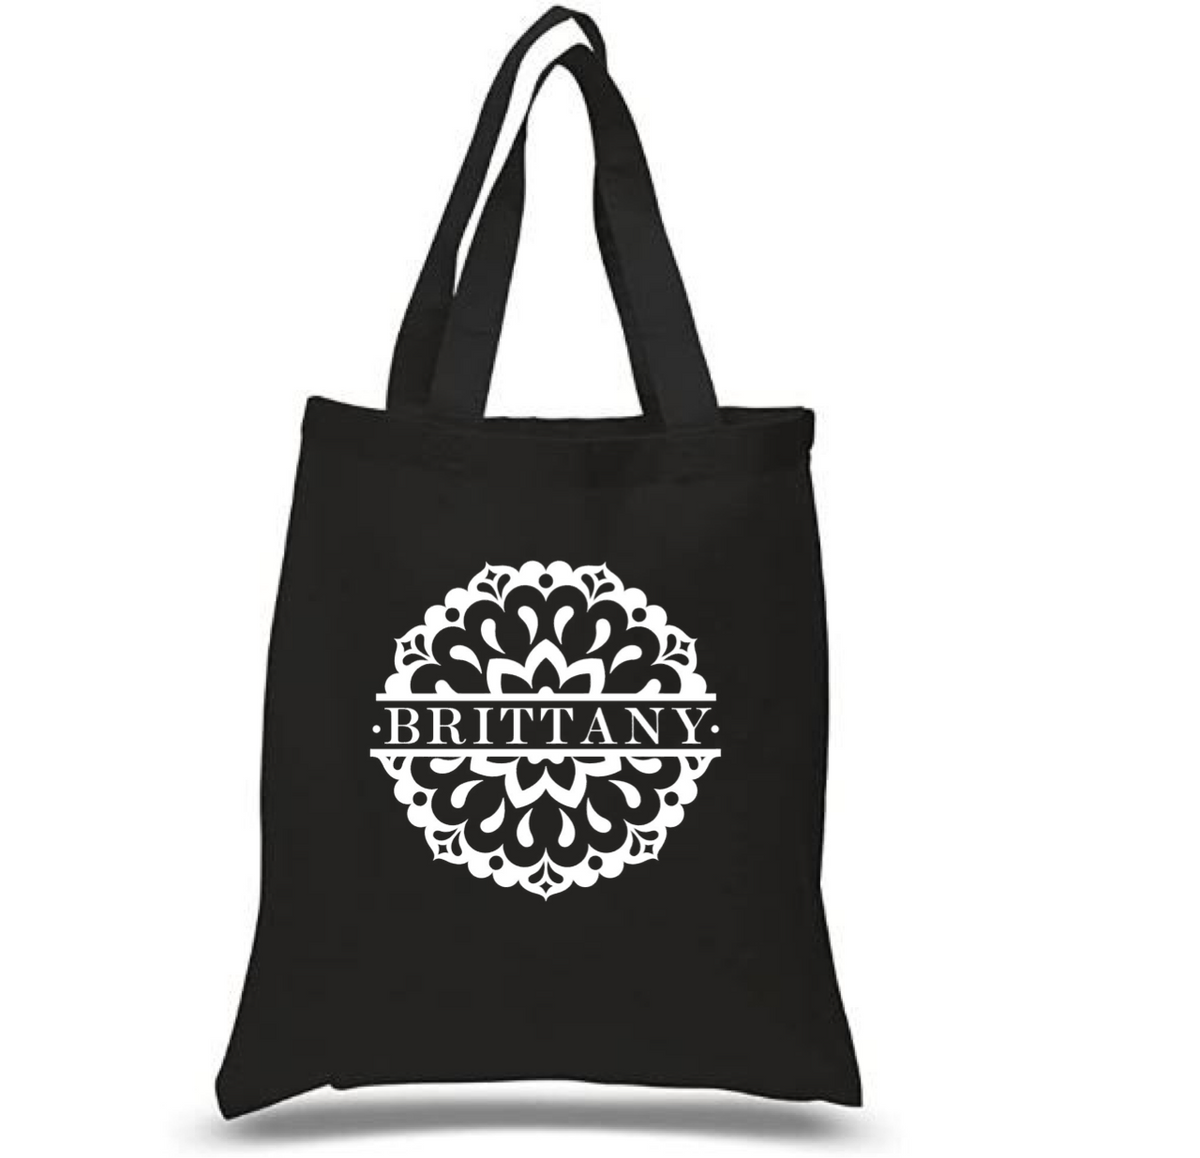 Tote Bag: Mandala Personalized * Add your name